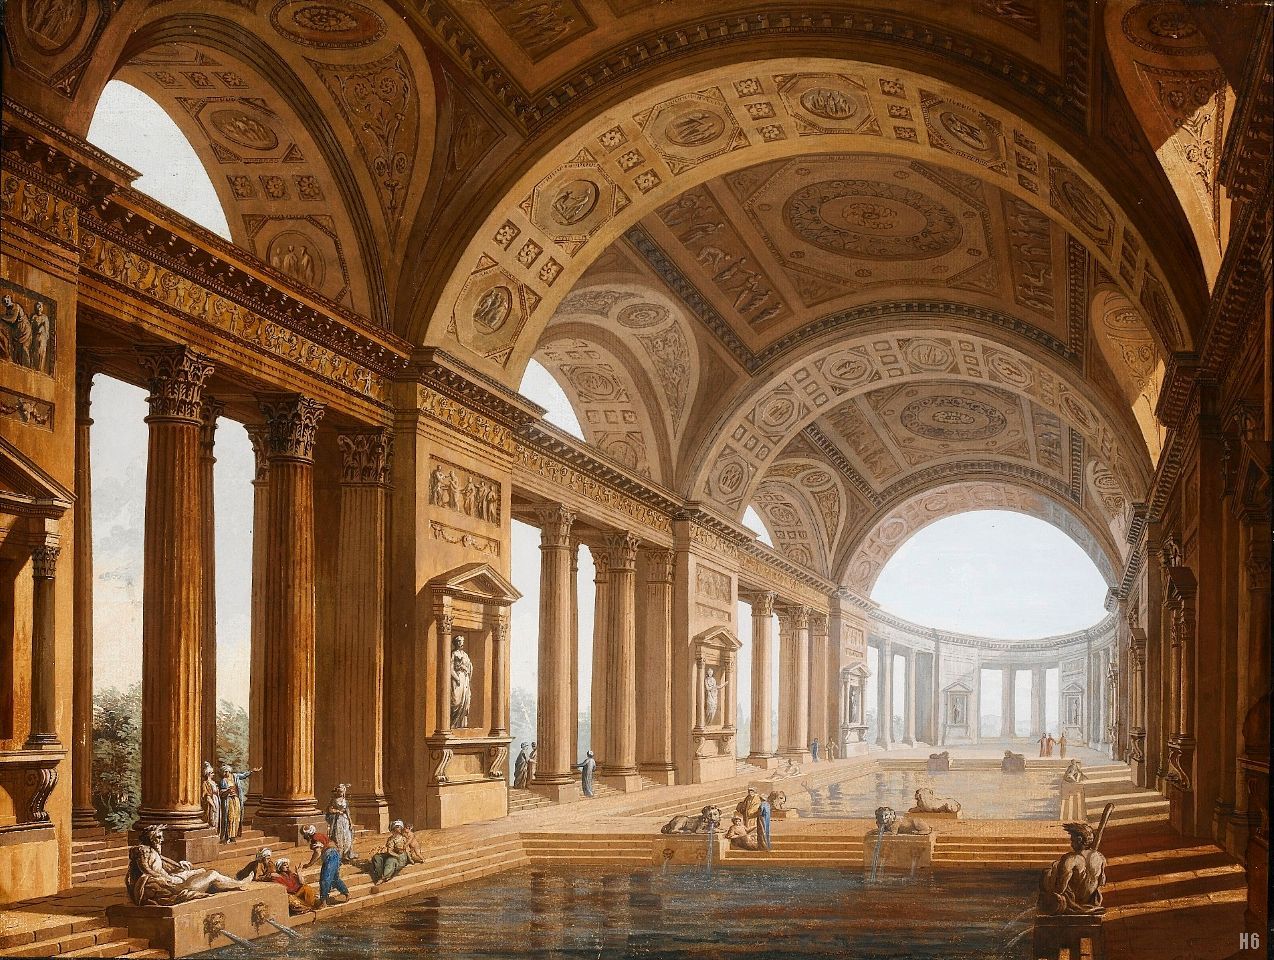 Interior View of an Ancient Roman Bath. Charles Louis Clerisseau. French. 1721-1820. pen, brown ink, watercolor and gouache on paper.
http://hadrian6.tumblr.com